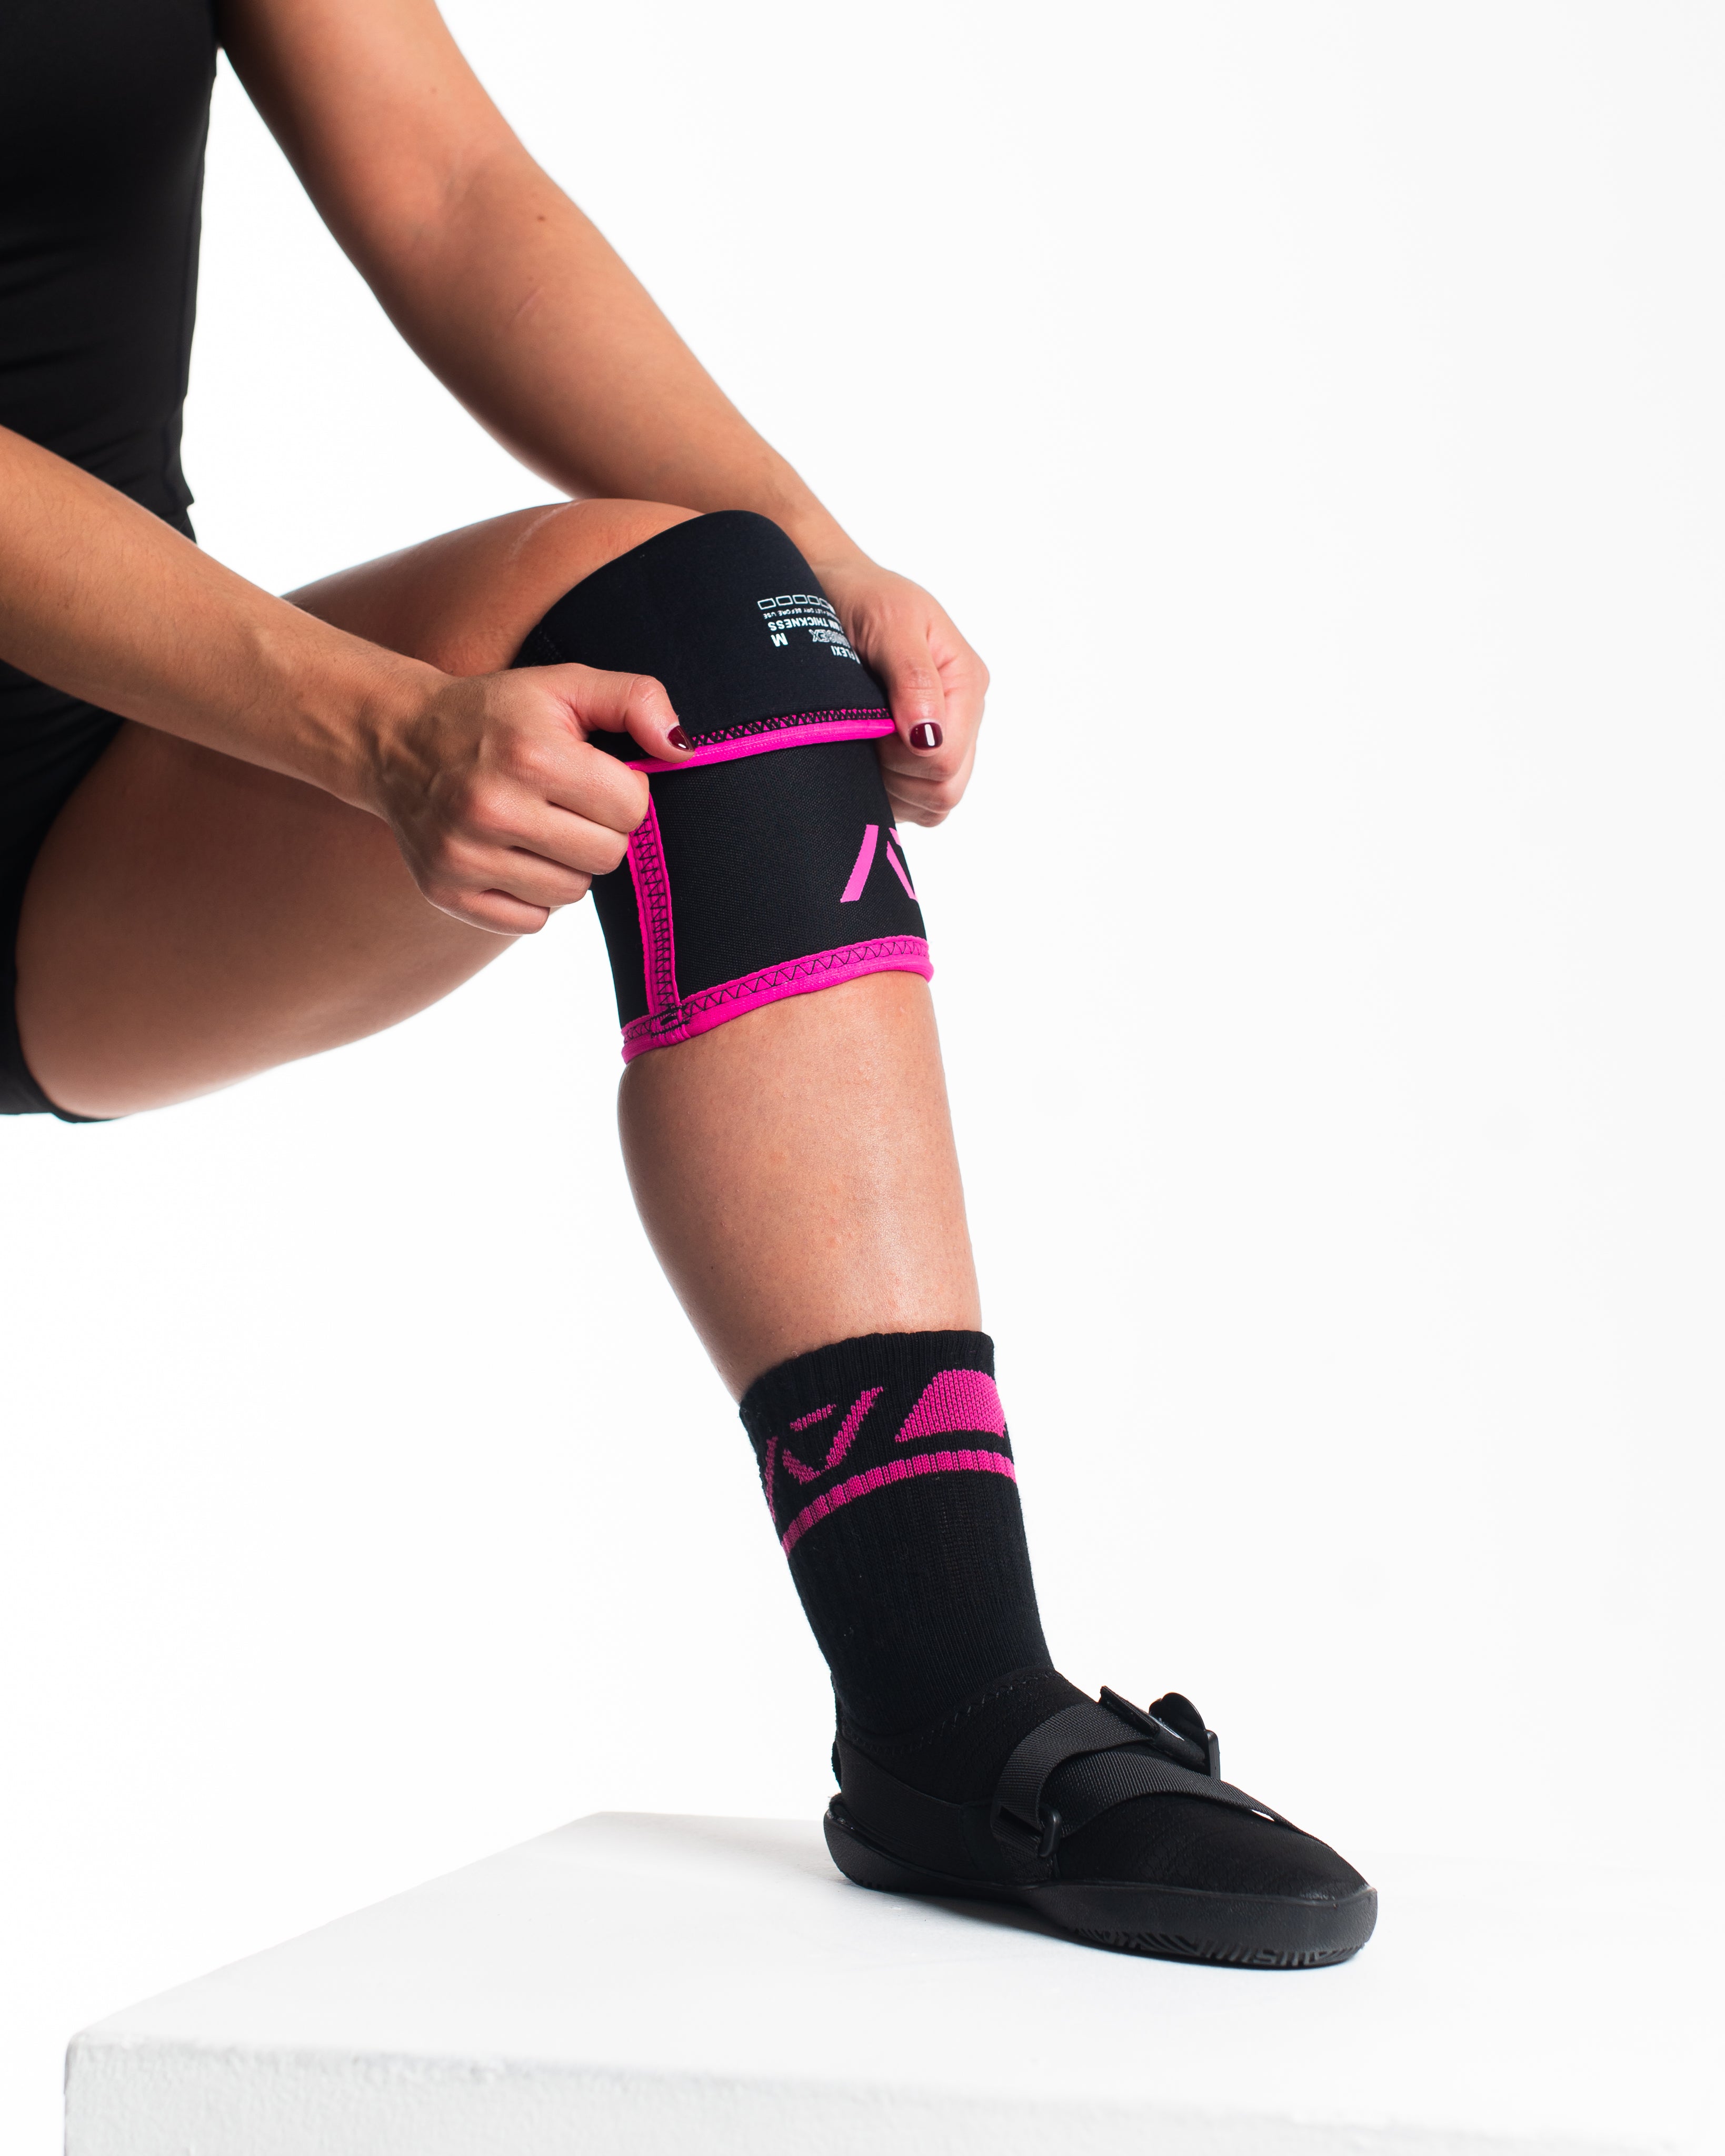 A7 IPF Approved Hourglass Knee Sleeves feature an hourglass-shaped taper fit to provide knee compression while maintaining proper tightness around the calf and quad, offered in three stiffnesses (Flexi, Stiff and Rigor Mortis). The IPF Approved Kit includes Powerlifting Singlet, A7 Meet Shirt, A7 Zebra Wrist Wraps, A7 Deadlift Socks, Hourglass Knee, IPF Approved PAL Lever. Genouillères powerlifting shipping to France, Spain, Ireland, Germany, Italy, Sweden and EU.